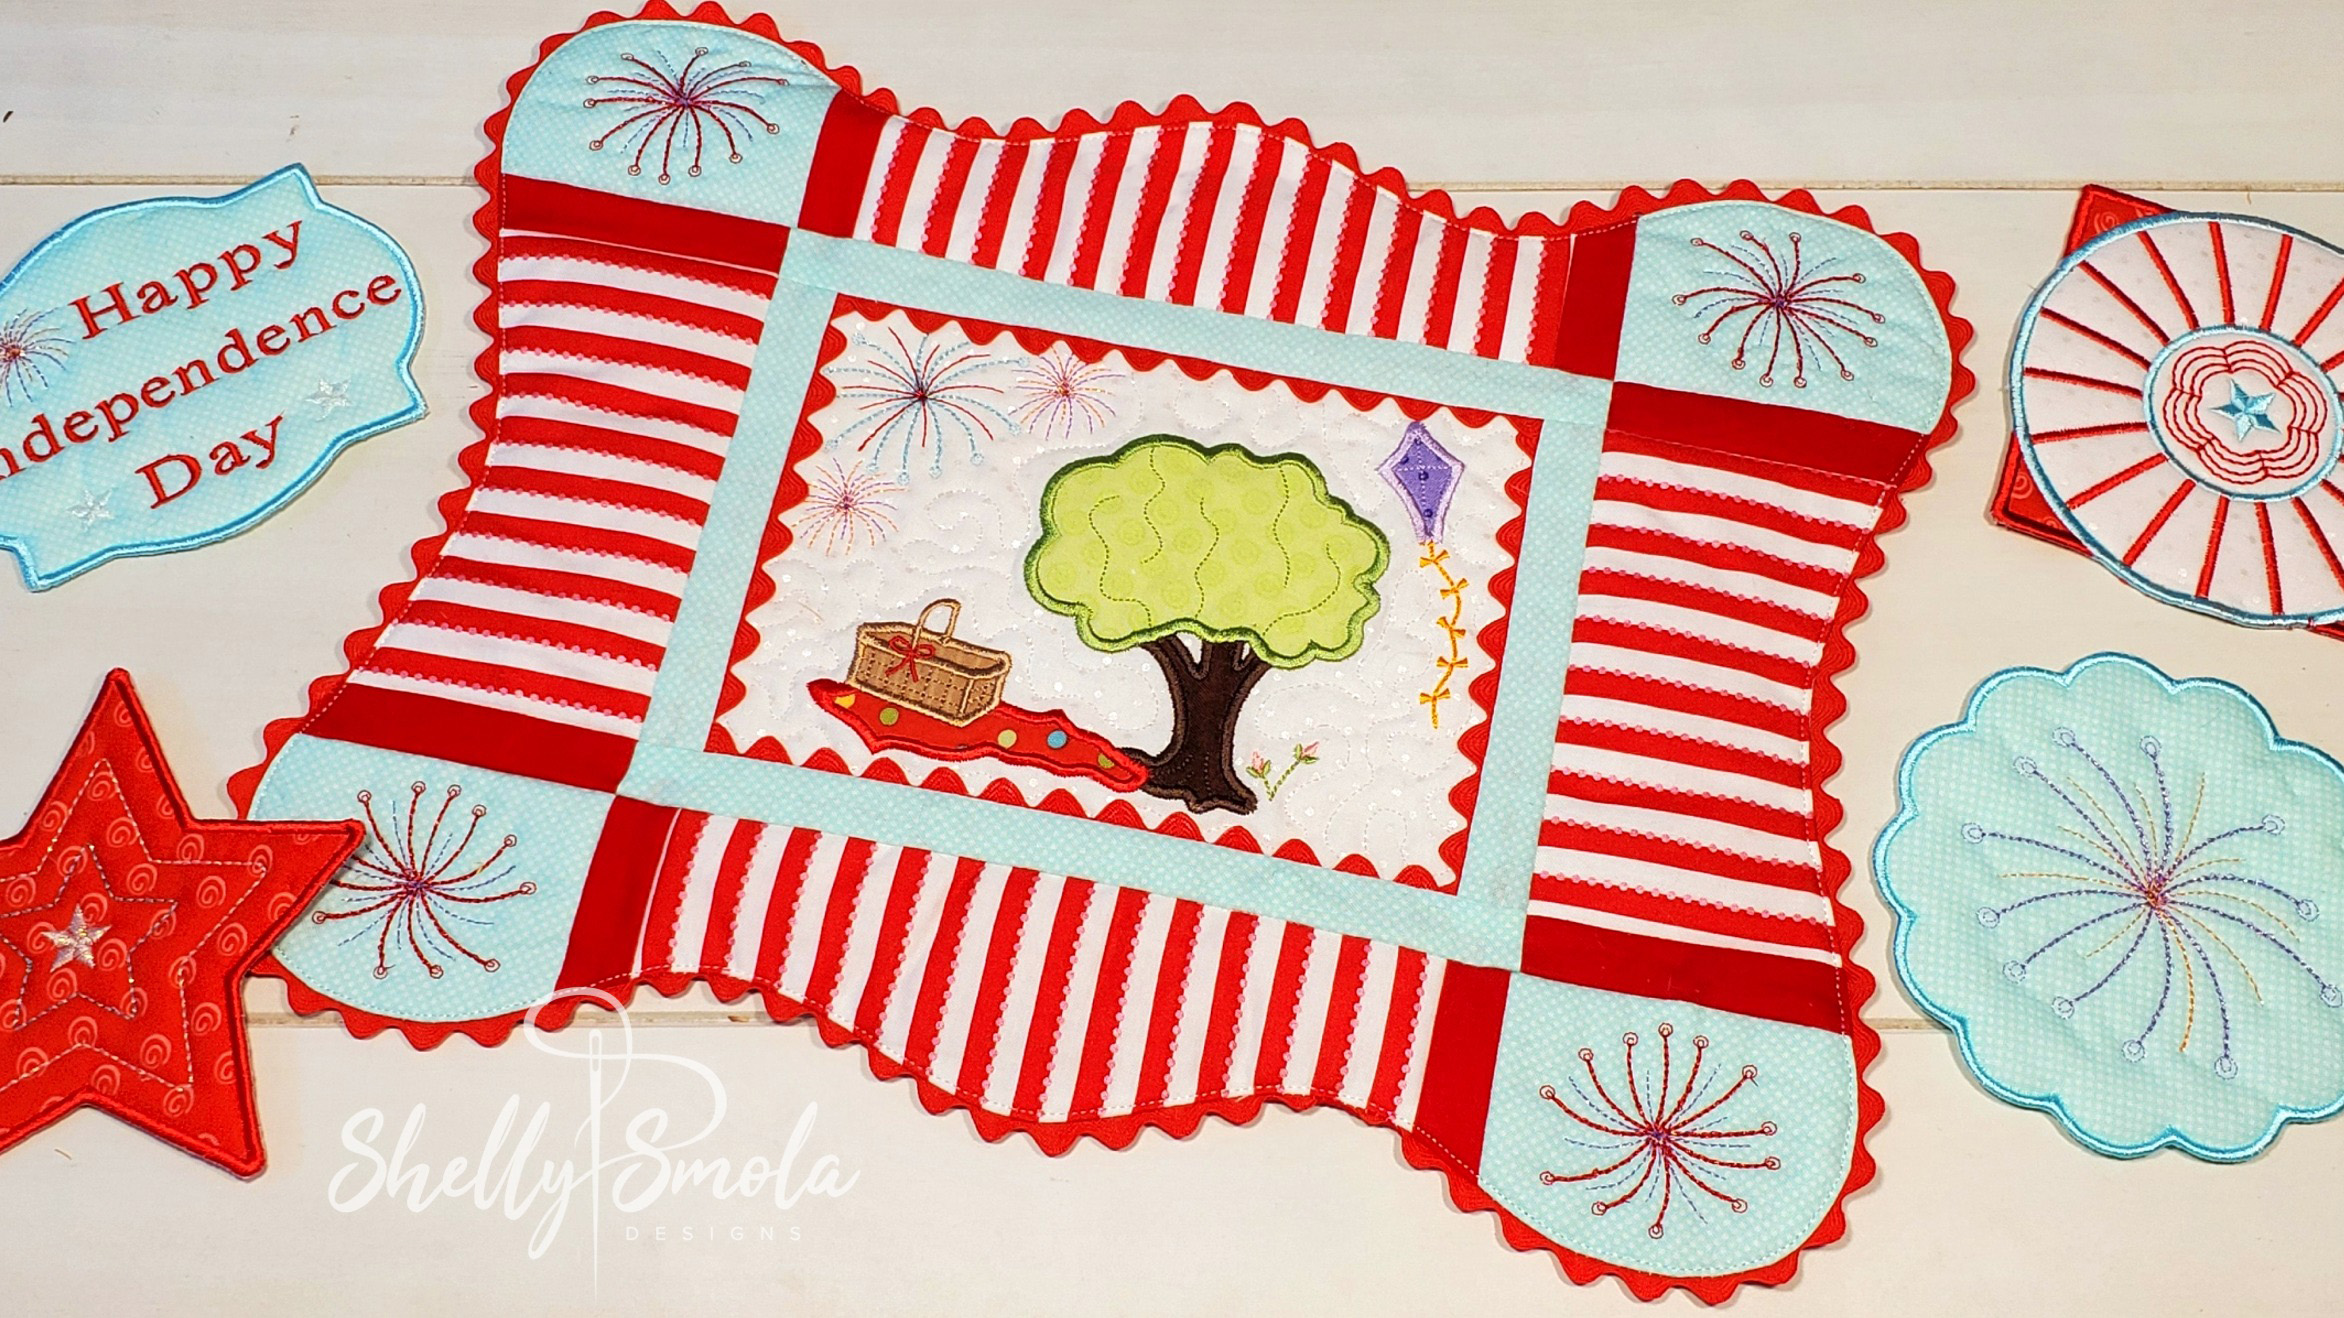 Picnic Party Set by Shelly Smola